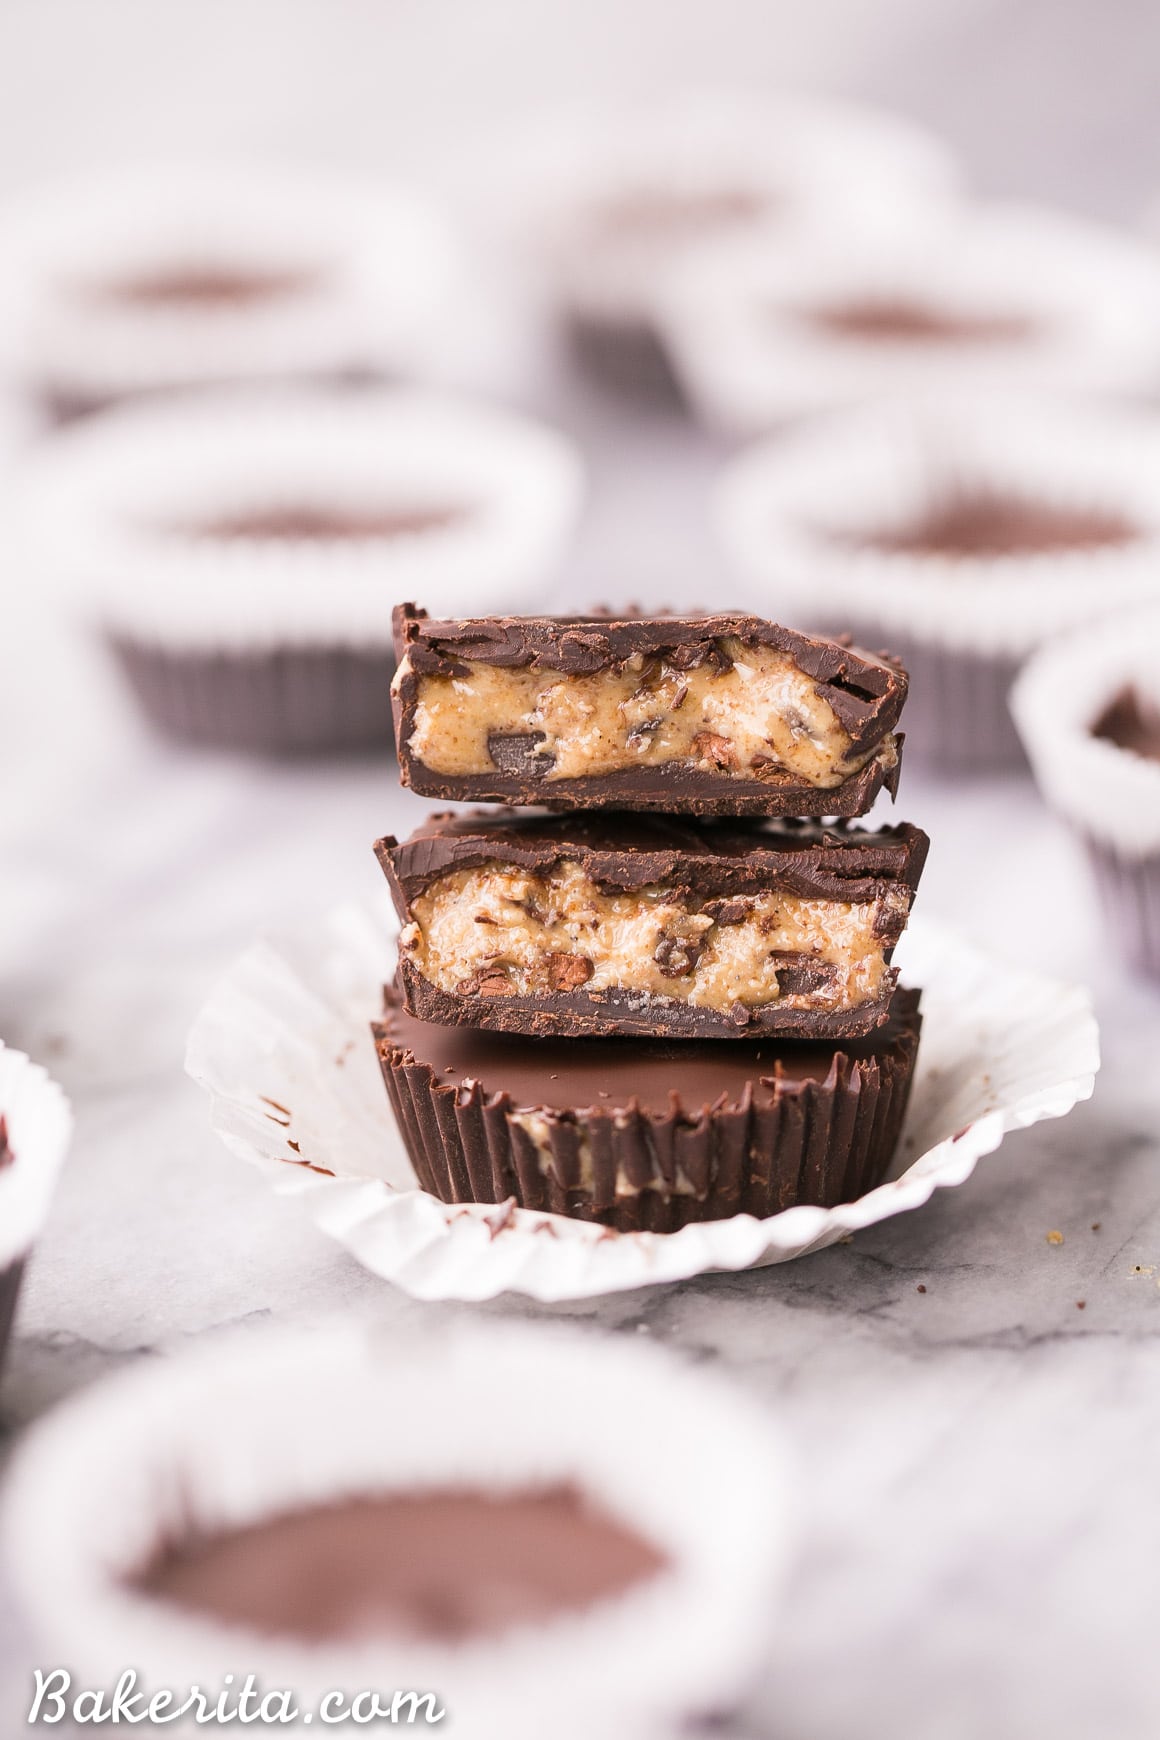 These Chocolate Chip Cookie Dough Cups are an easy way to satisfy your cookie dough craving in a healthy + delicious way! These easy, no-bake cups are gluten-free, Paleo, and vegan.